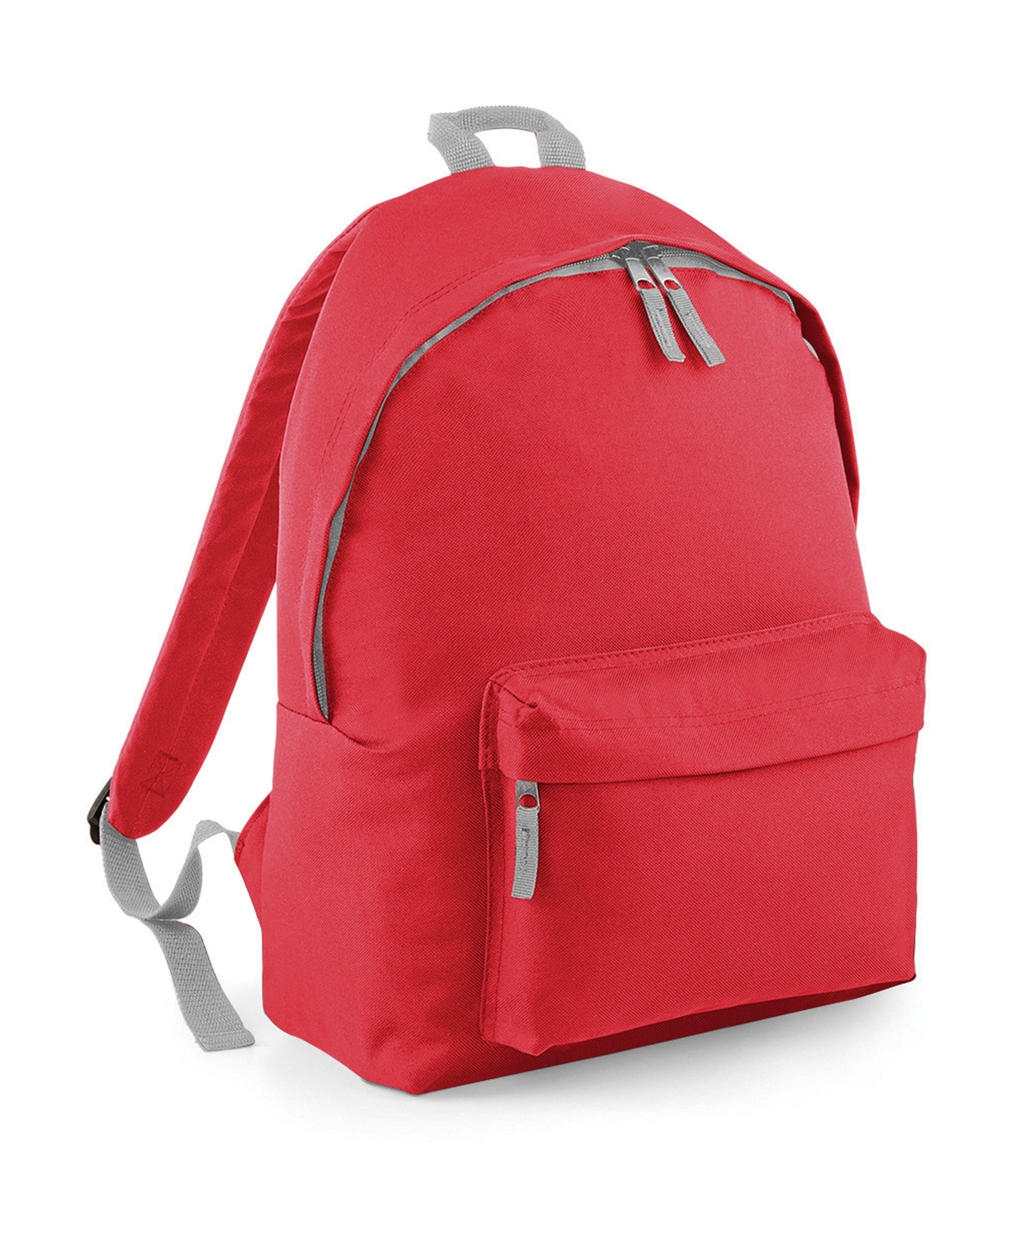 Fashion Backpack Coral/Light Grey Gris